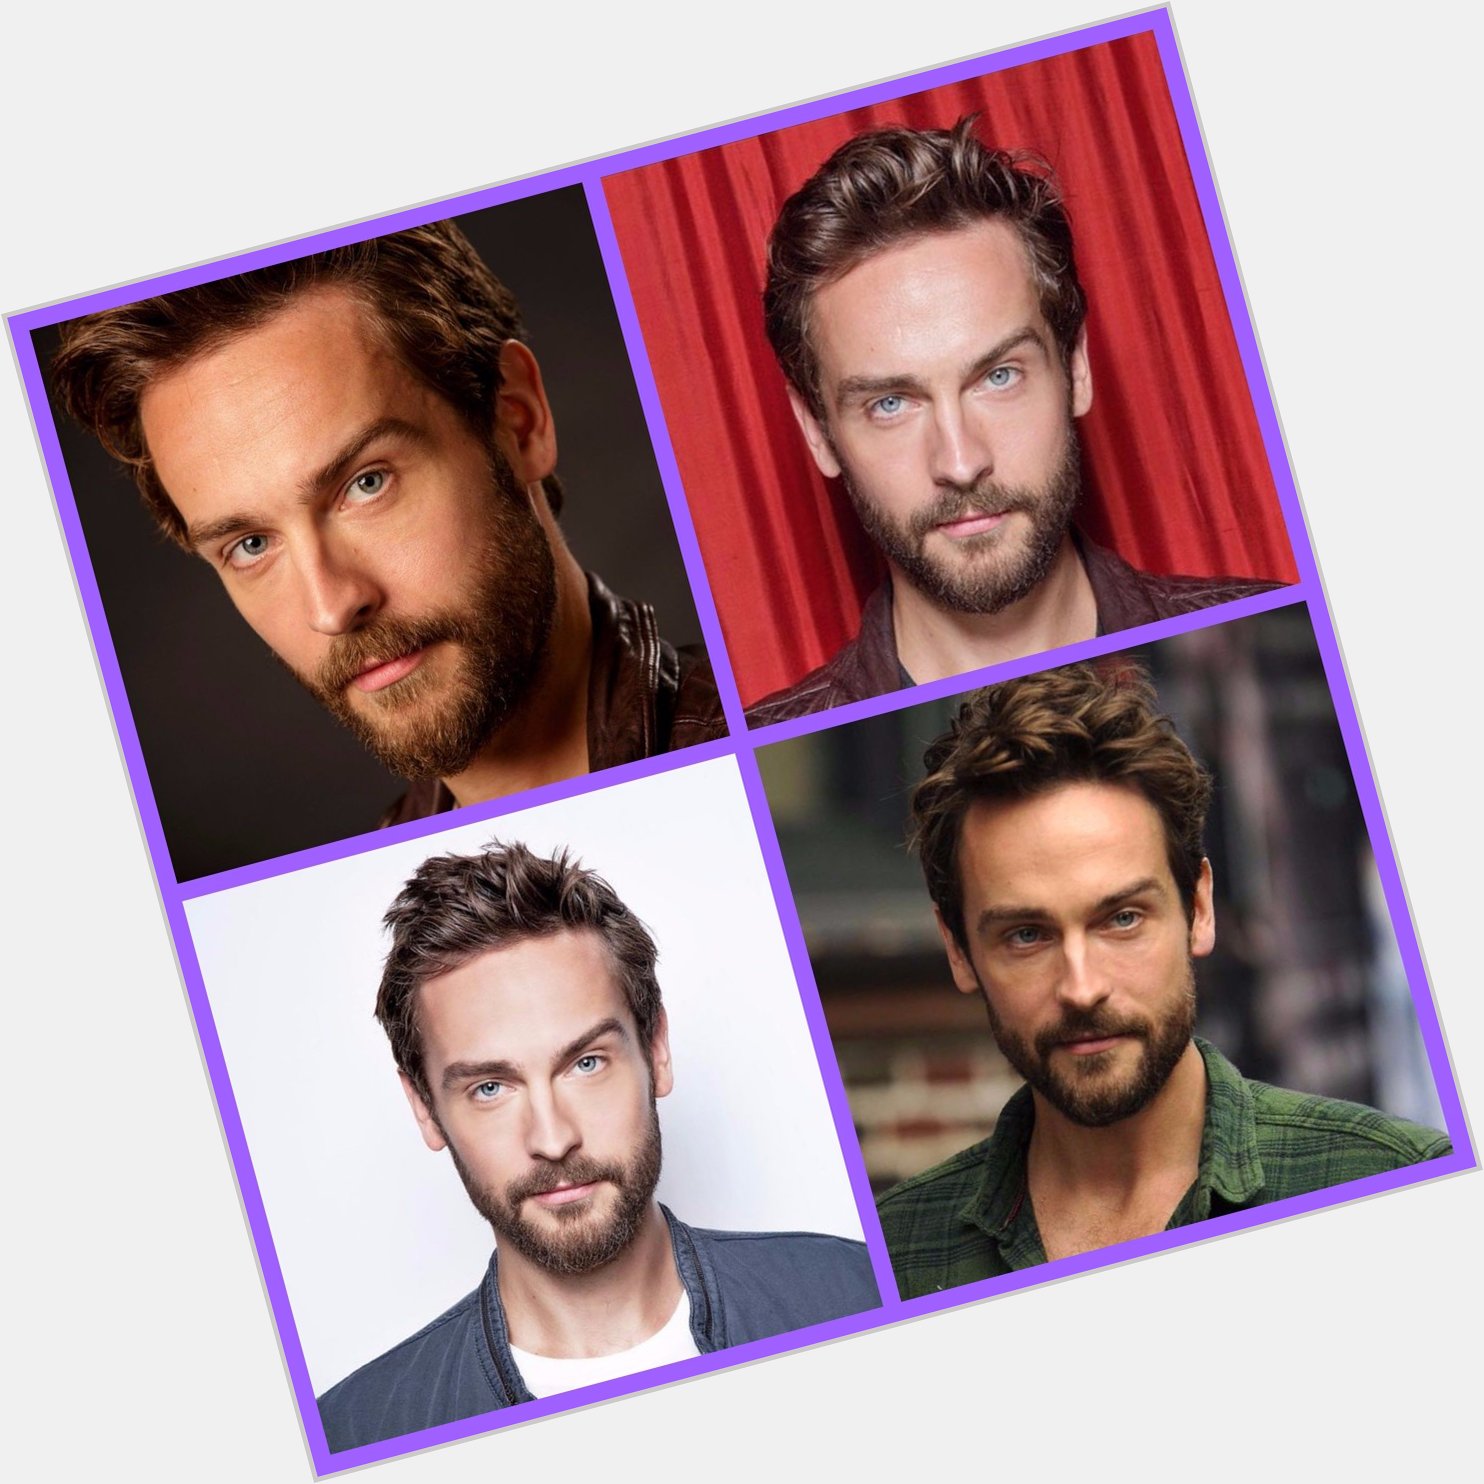 And also Happy Birthday to the lovely Tom Mison 